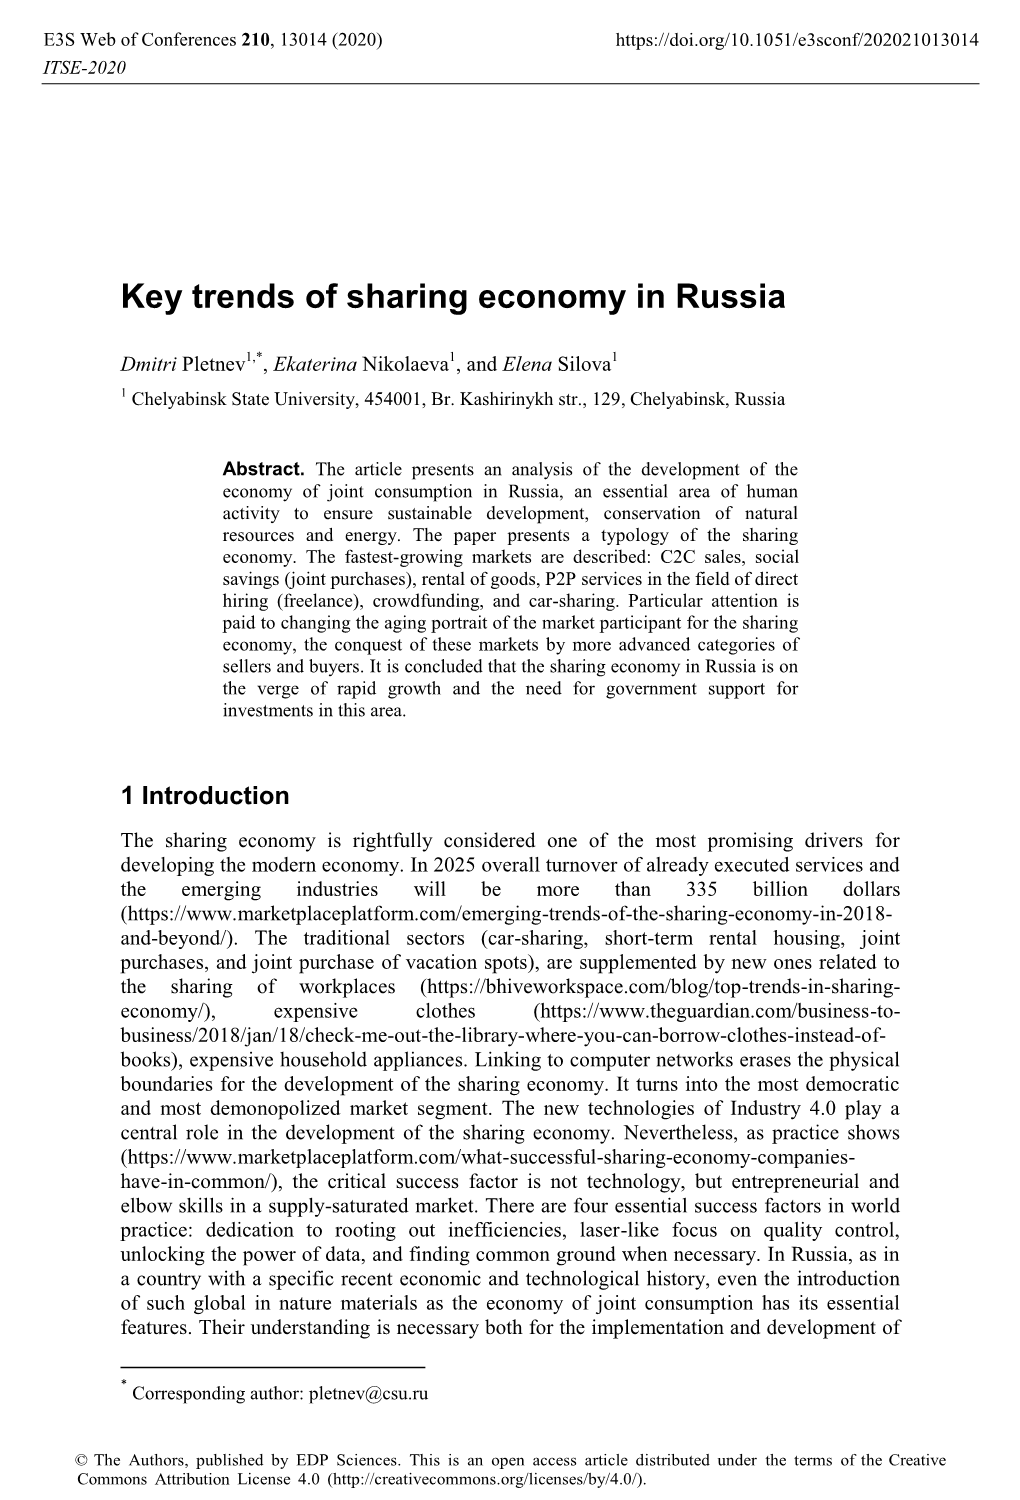 Key Trends of Sharing Economy in Russia